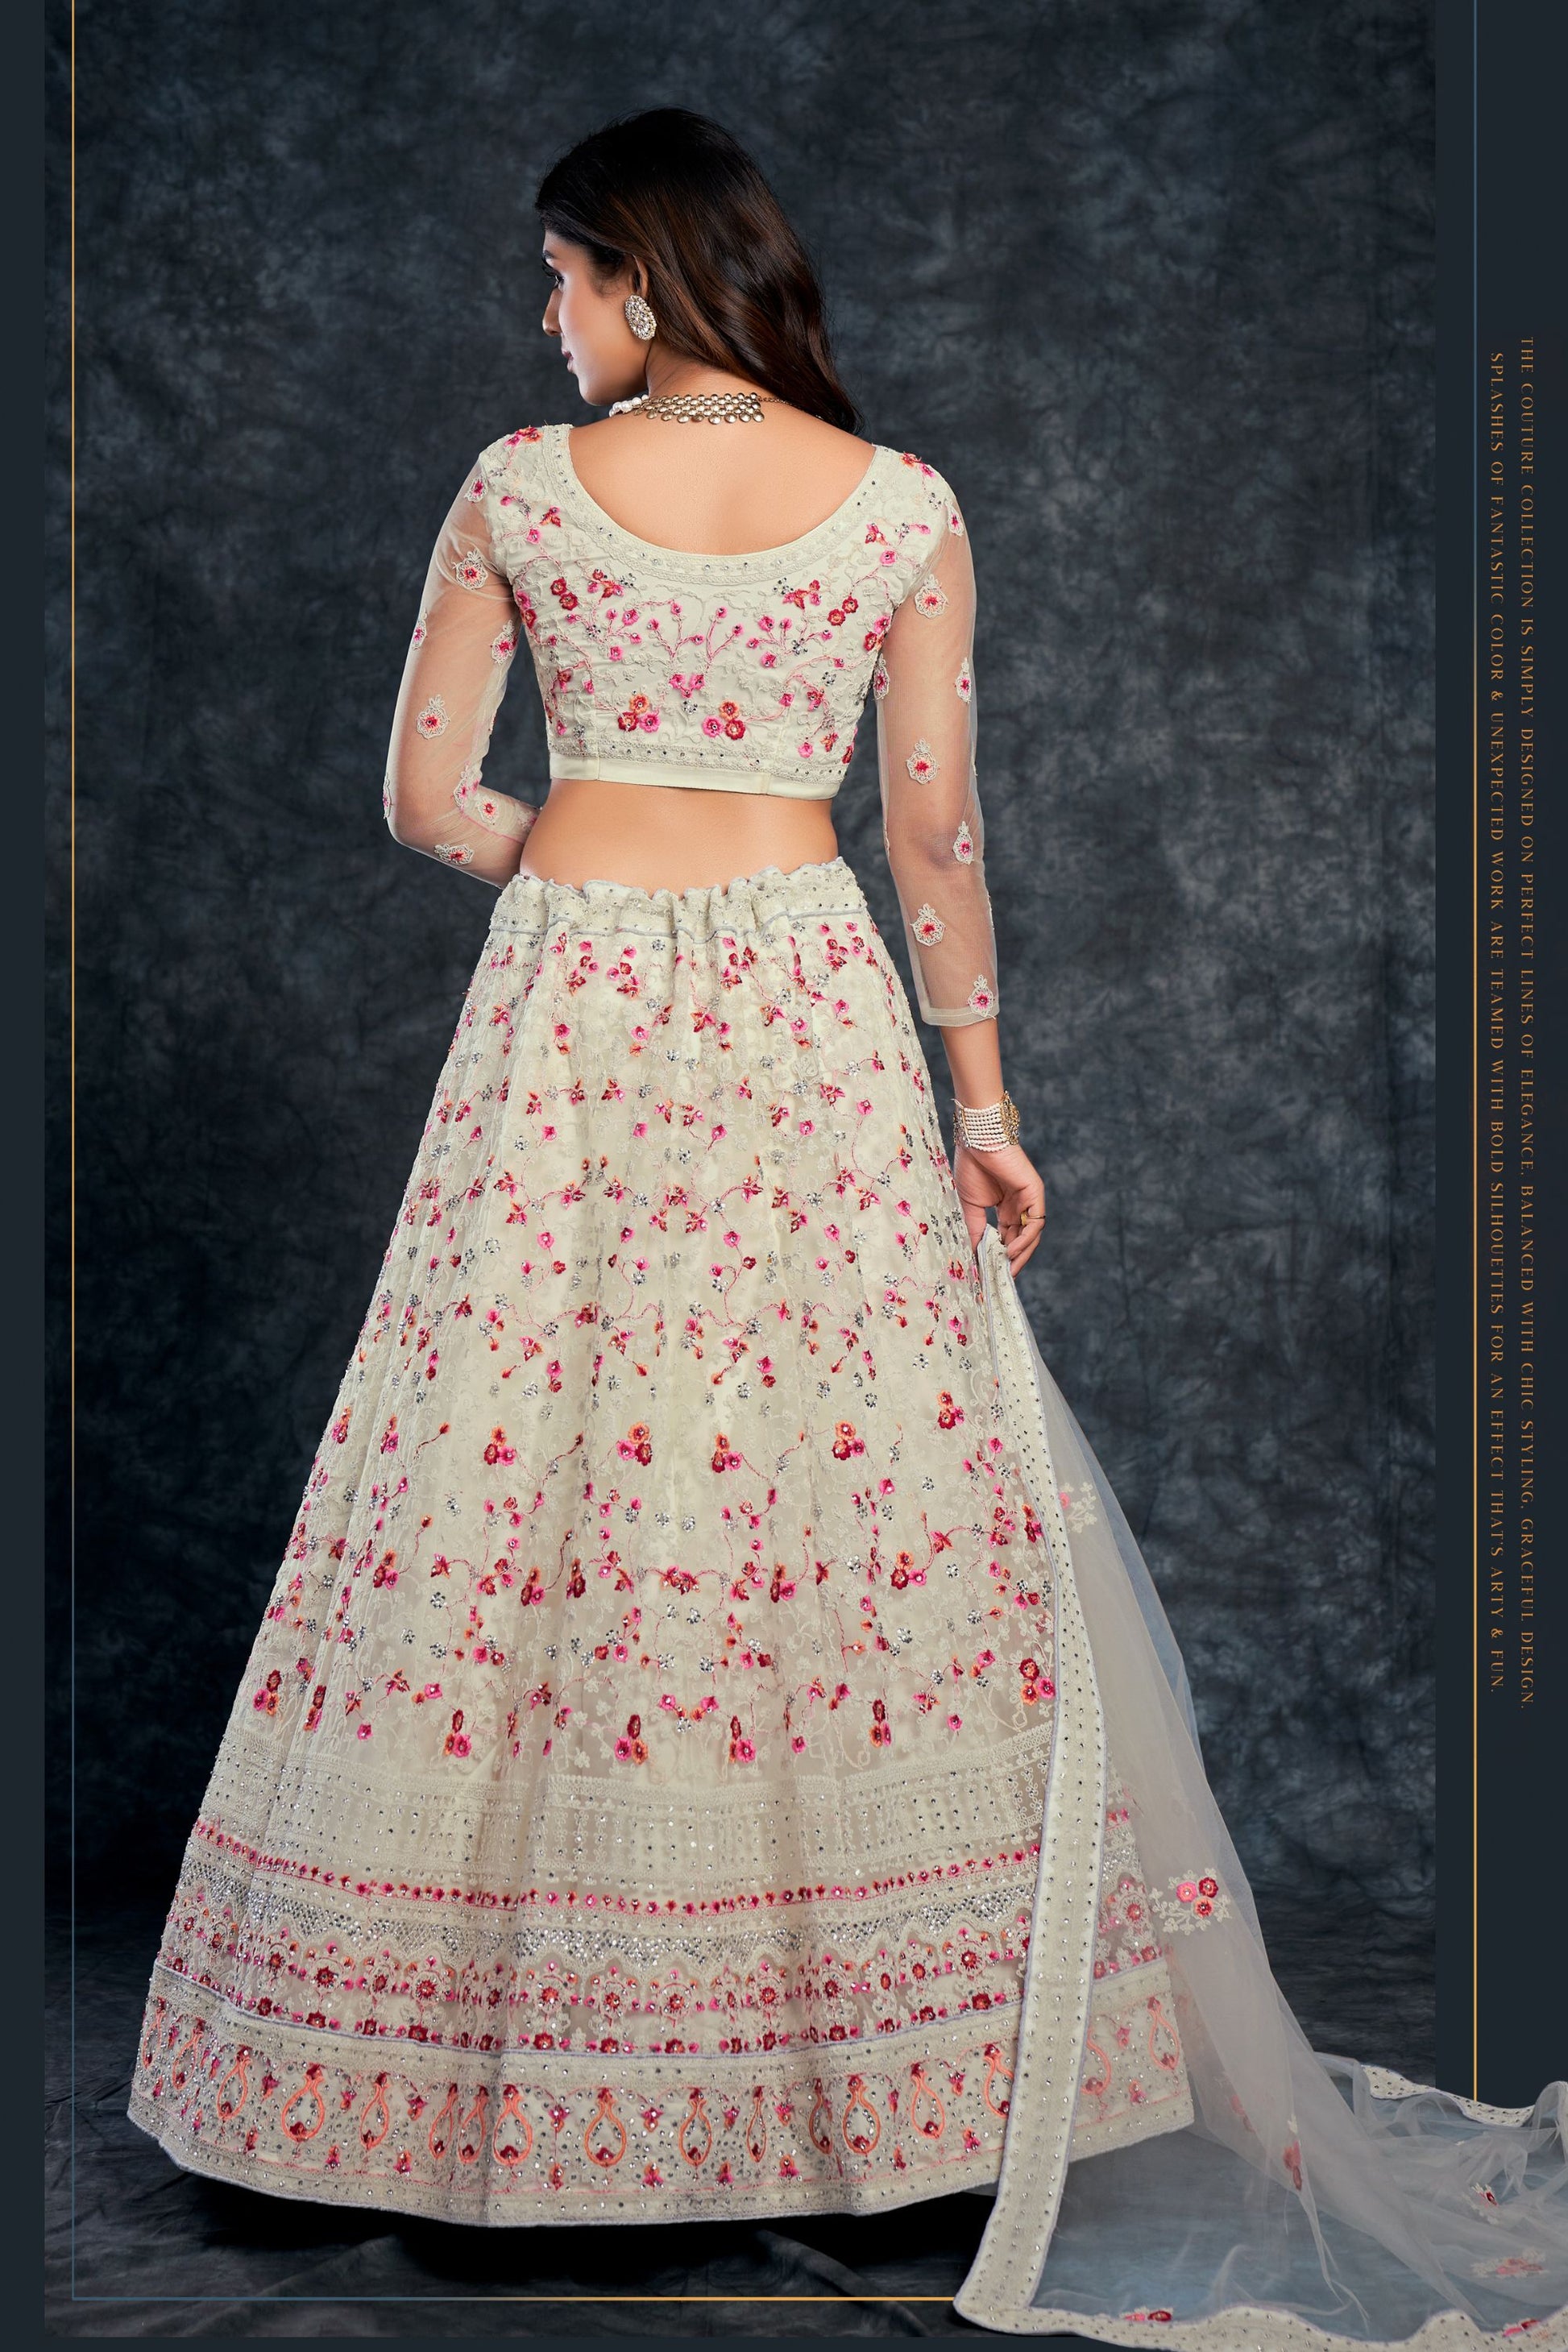 White Indian Silk Floral Embroidered Lehenga Choli For Indian Festivals & Weddings - Sequence Embroidery Work, Thread Work, Stone Work, Zari Work